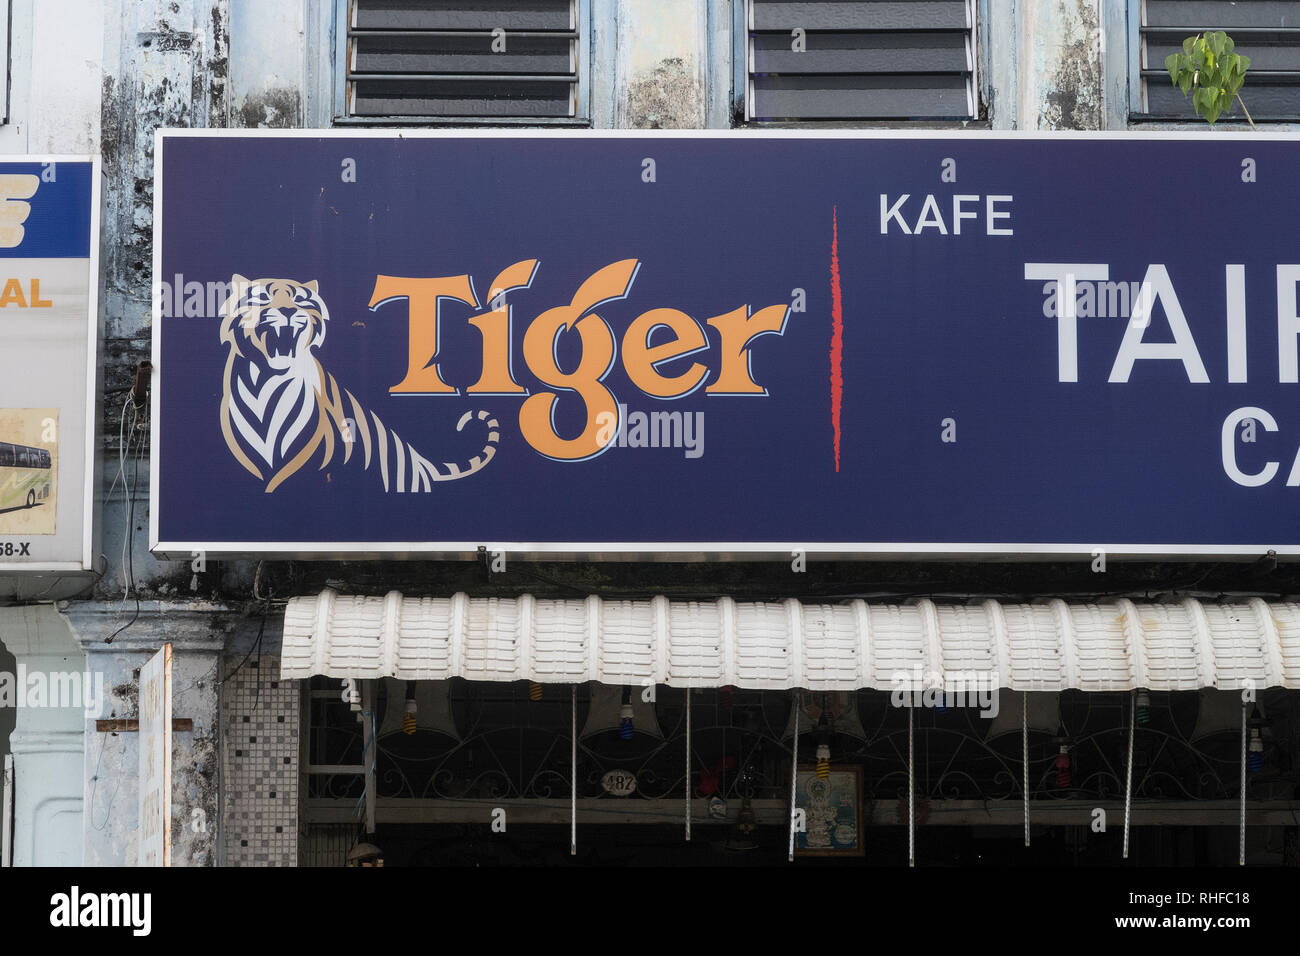 Penang, Malaysia - July 30, 2018: Advertisement board on a cafe in Penang, Malaysia advertisering Tiger beer, a well known beer brand in Asia Stock Photo